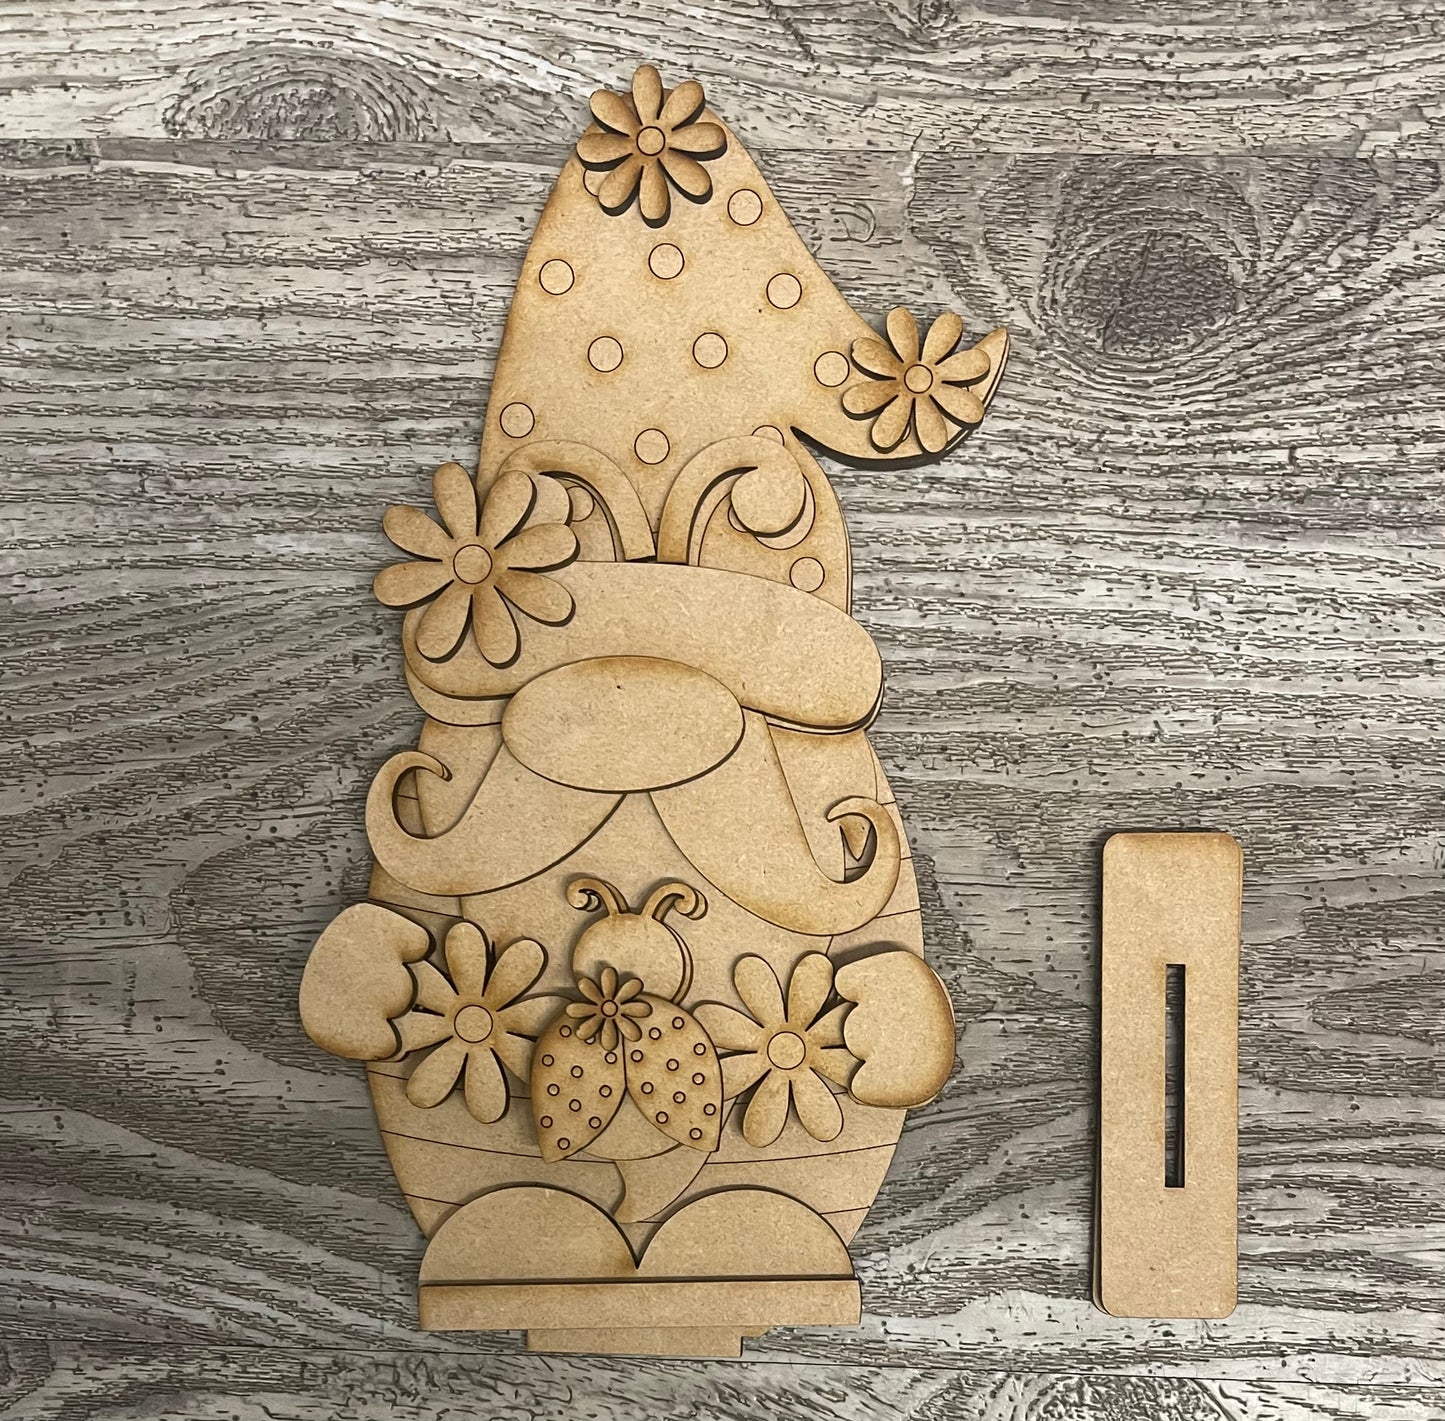 Snowman Gnome, 2 sizes, cutout, unpainted wooden cutout, ready for you to paint